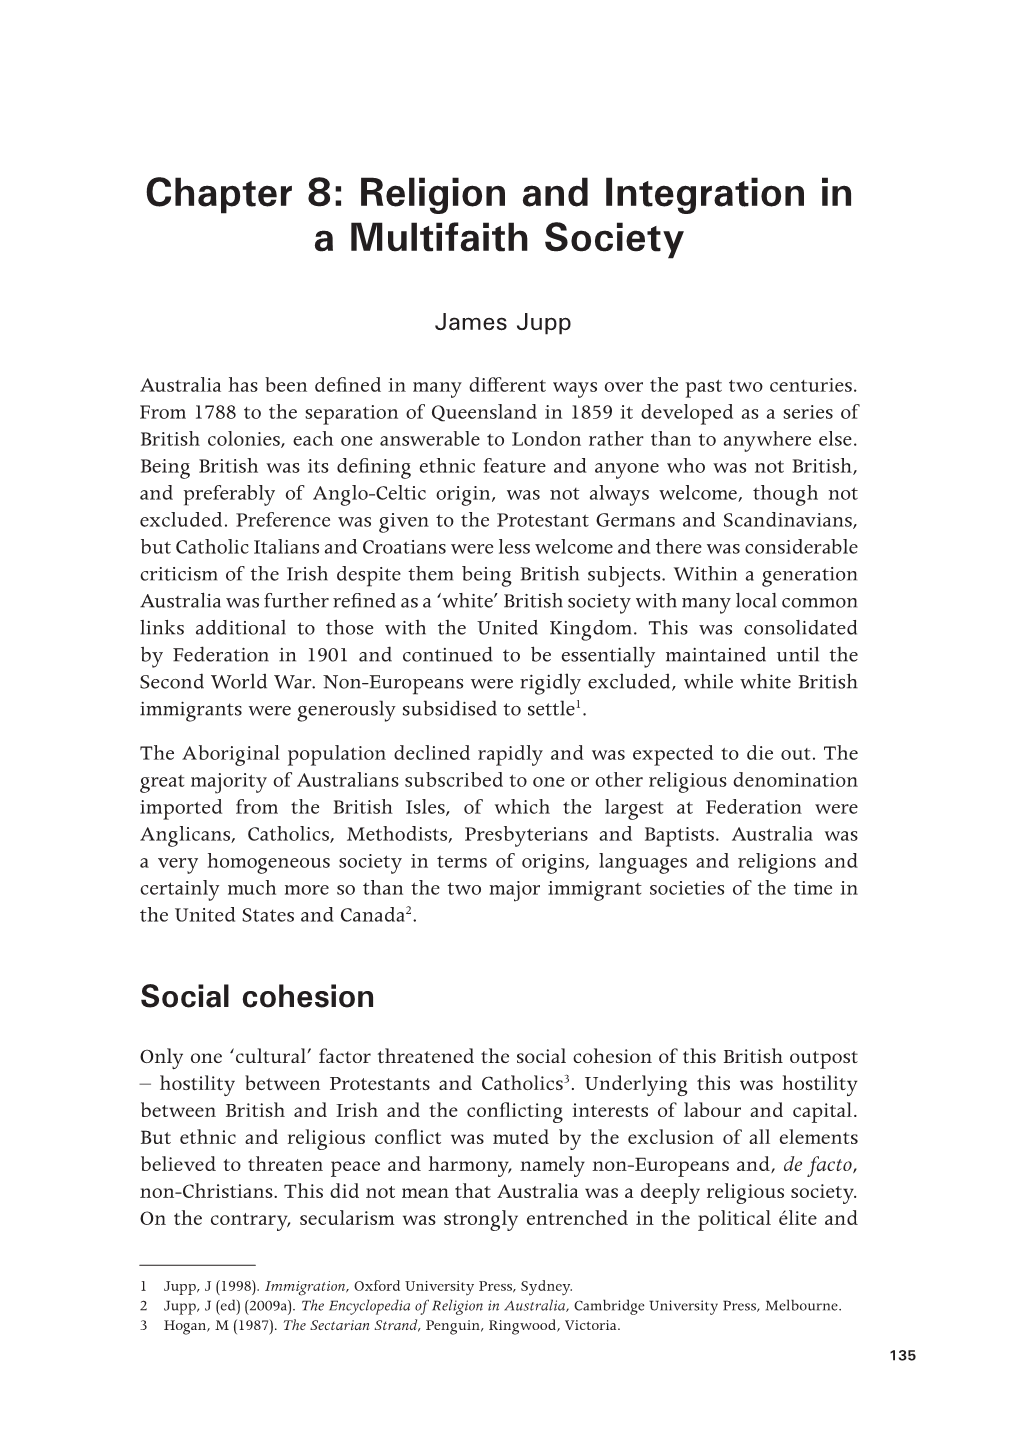 Chapter 8: Religion and Integration in a Multifaith Society